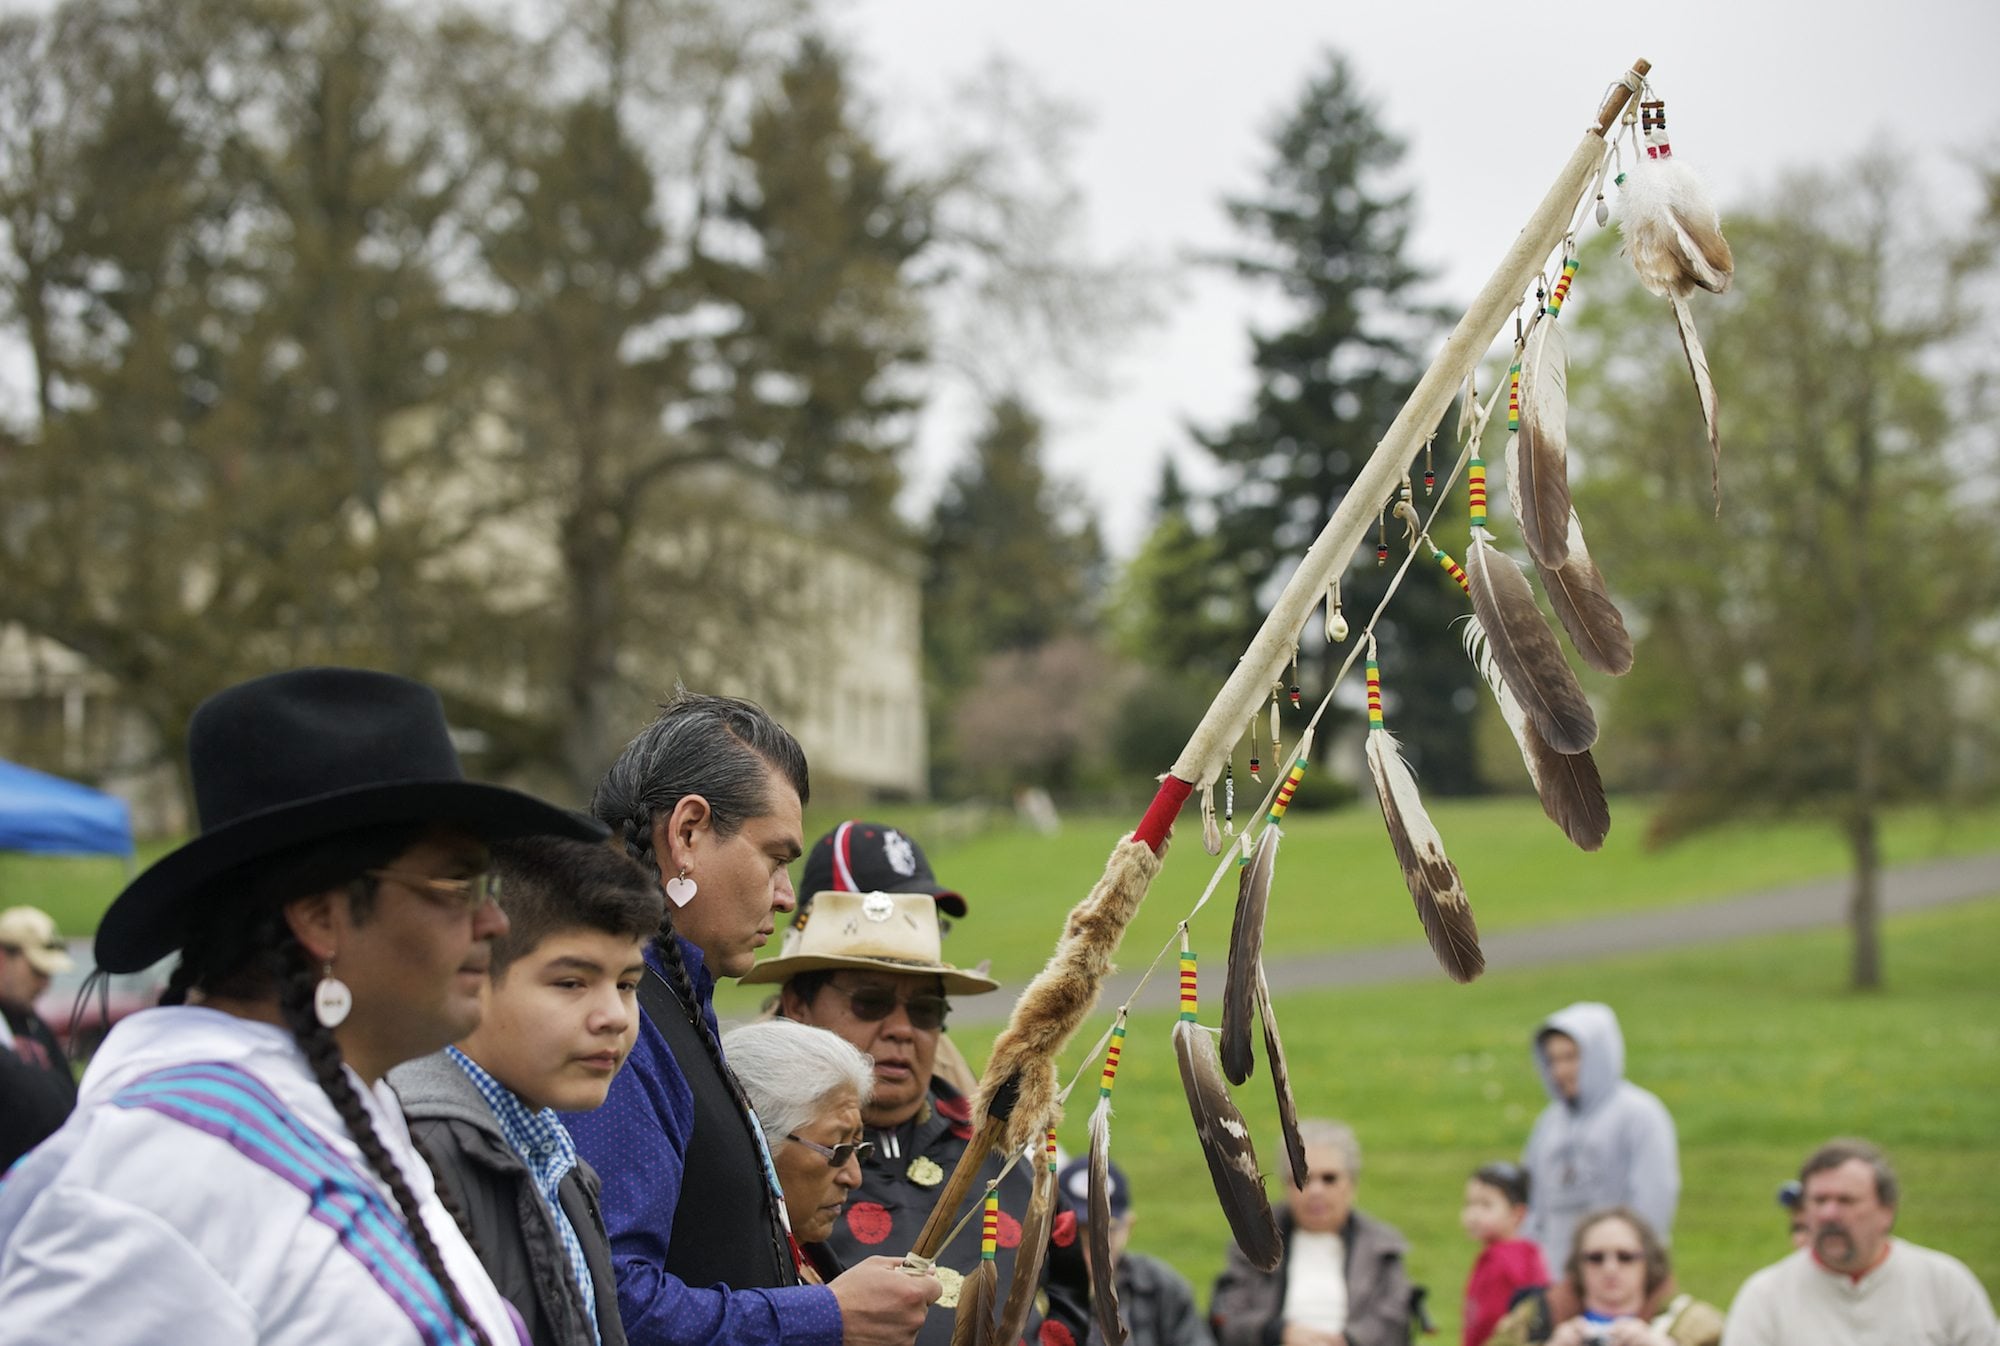 The Eagle Staff waits to be placed at the annual Nez Perce Chief Redheart Memorial Ceremony at Fort Vancouver National Historic Site.